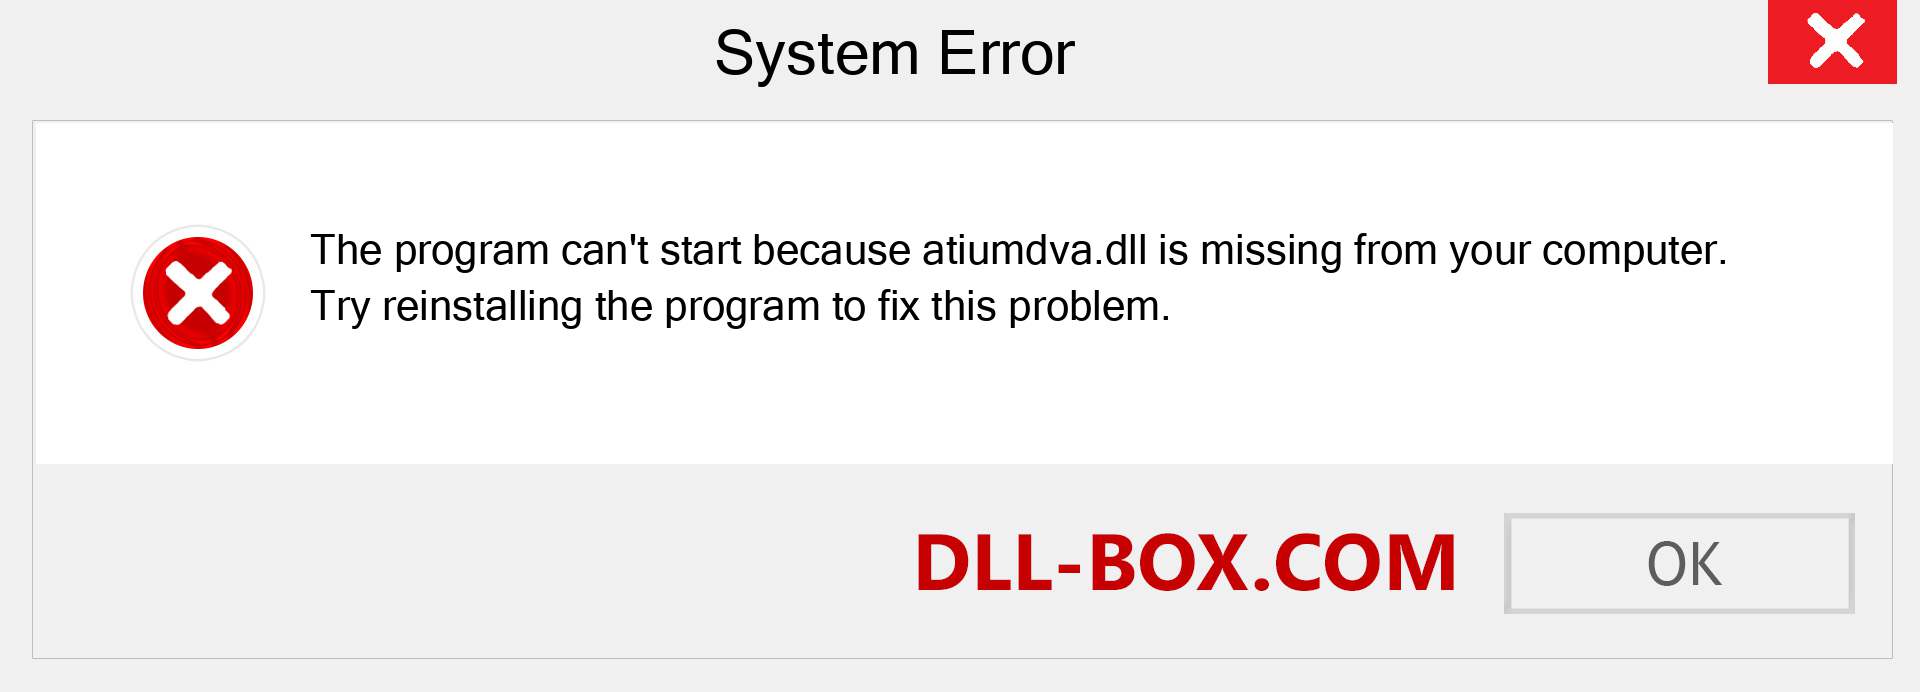  atiumdva.dll file is missing?. Download for Windows 7, 8, 10 - Fix  atiumdva dll Missing Error on Windows, photos, images